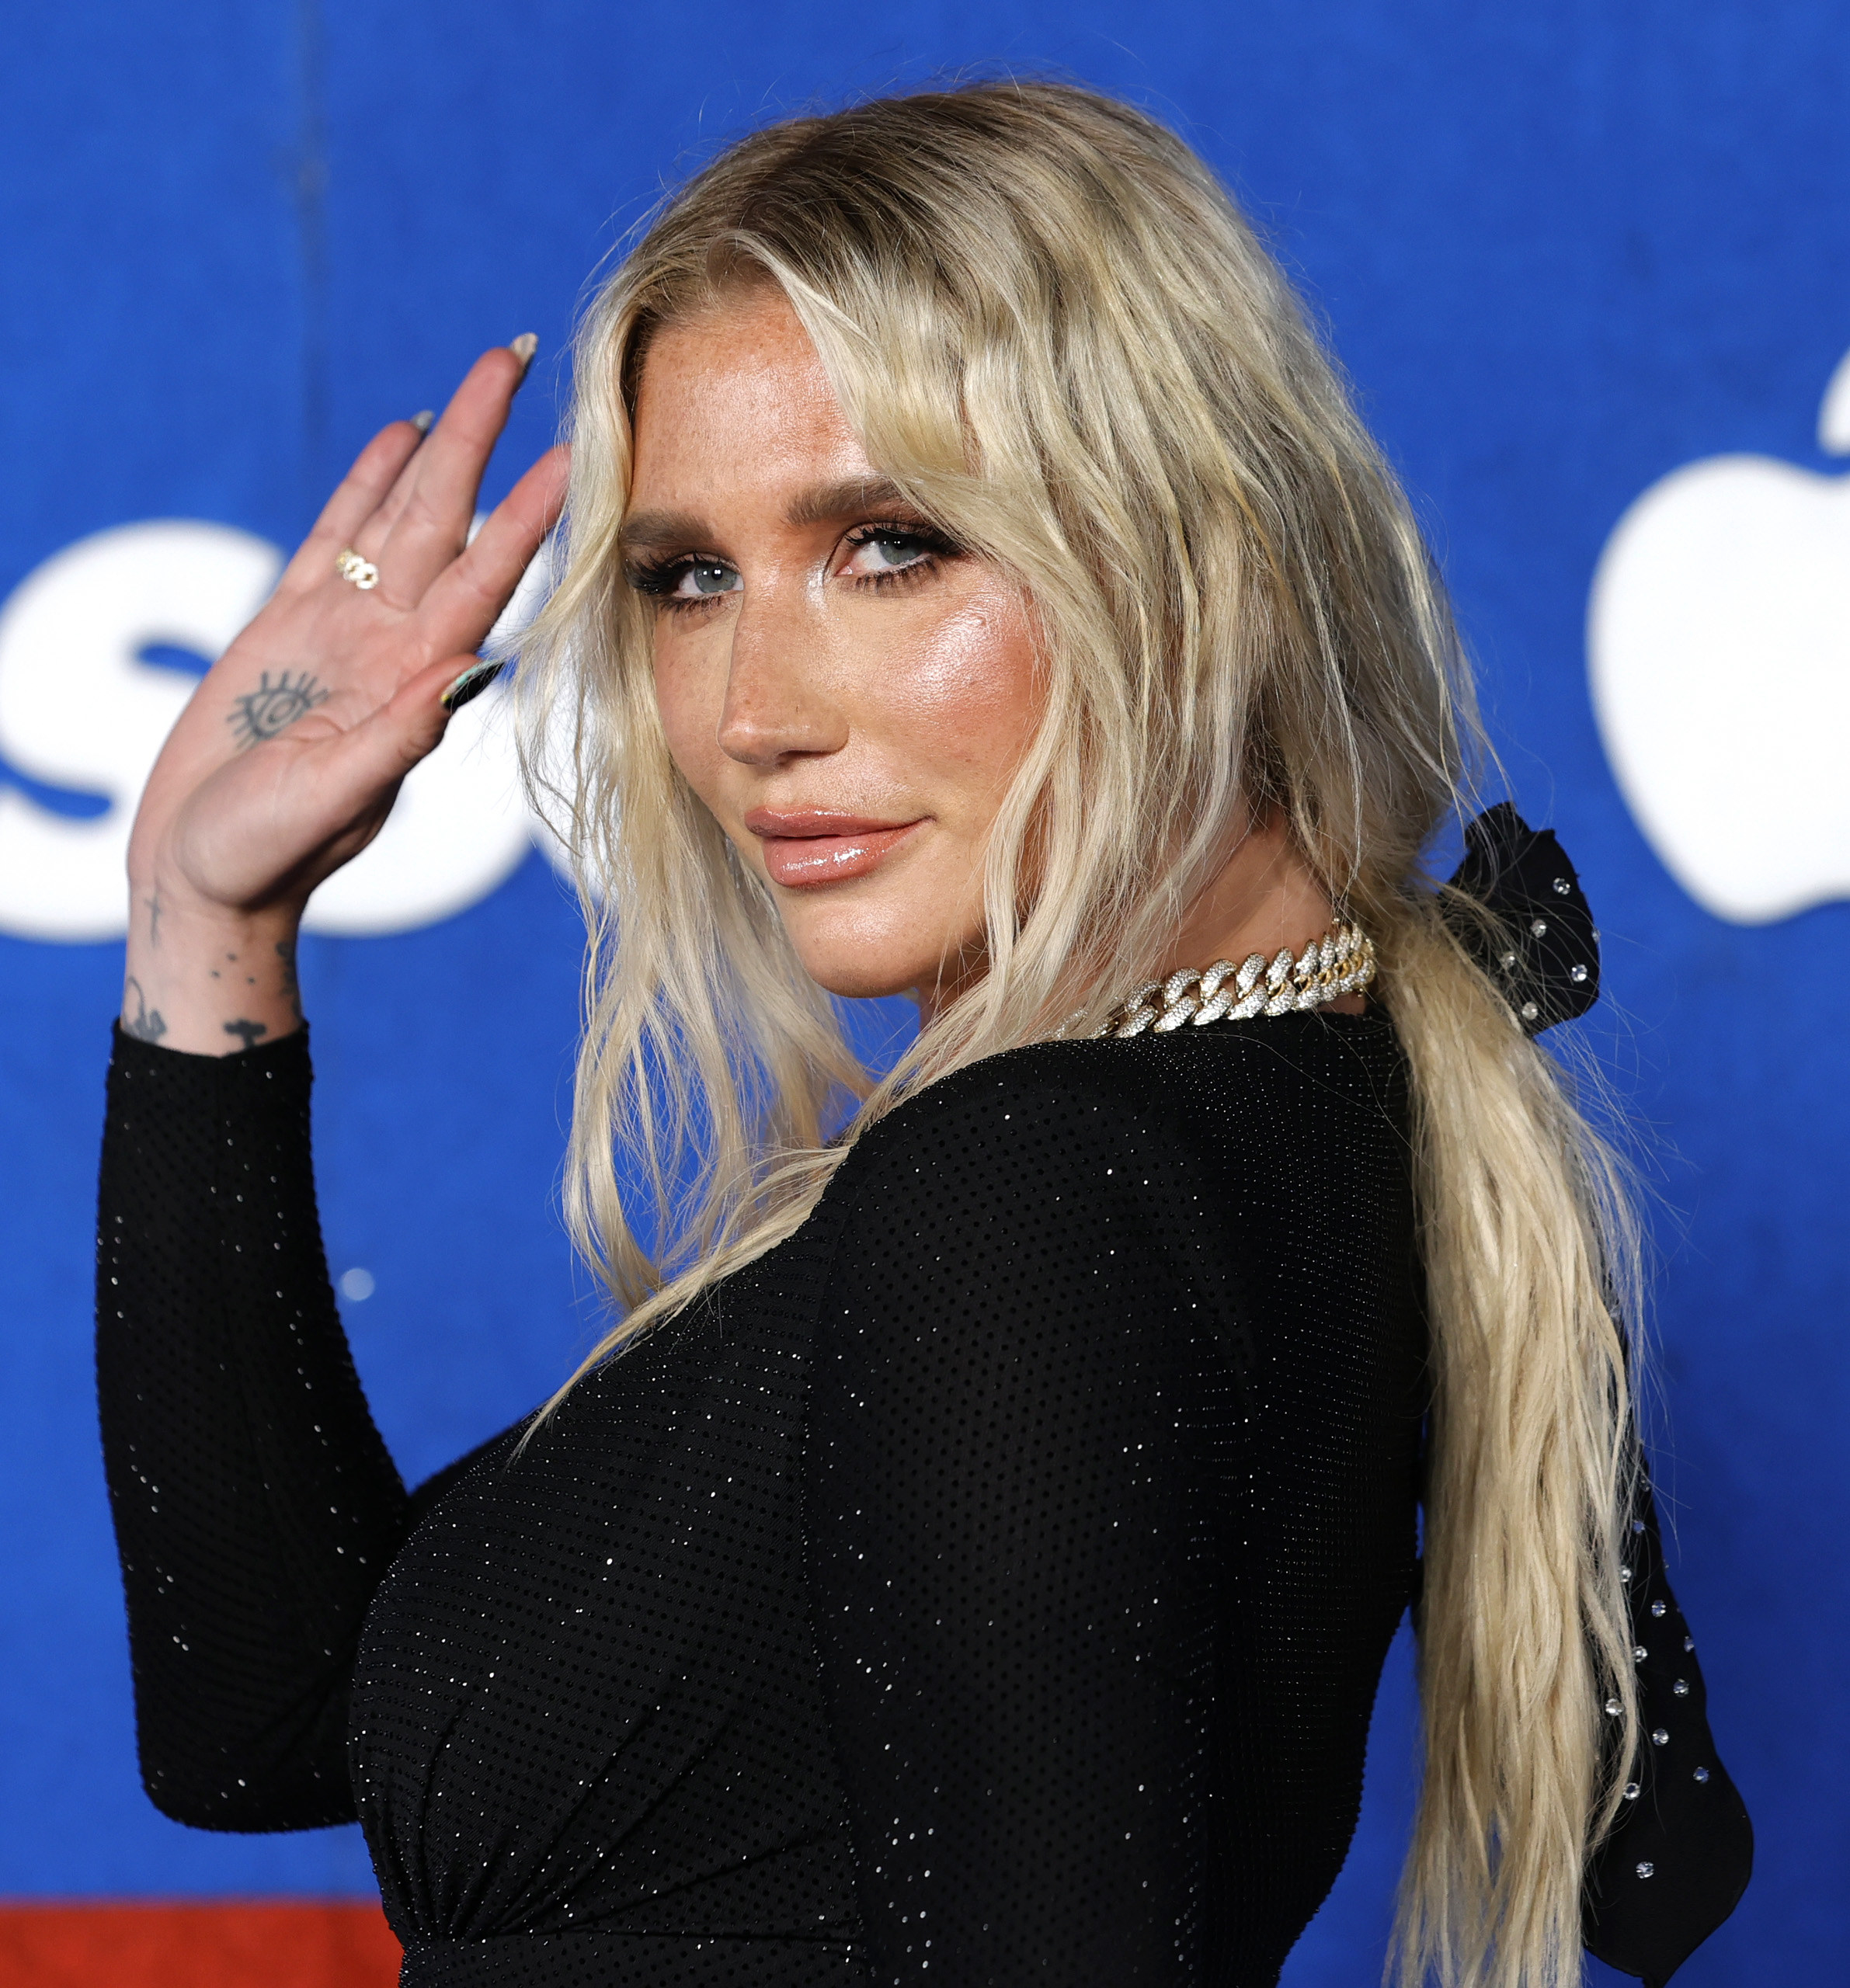 Kesha smiles and waves on the red carpet